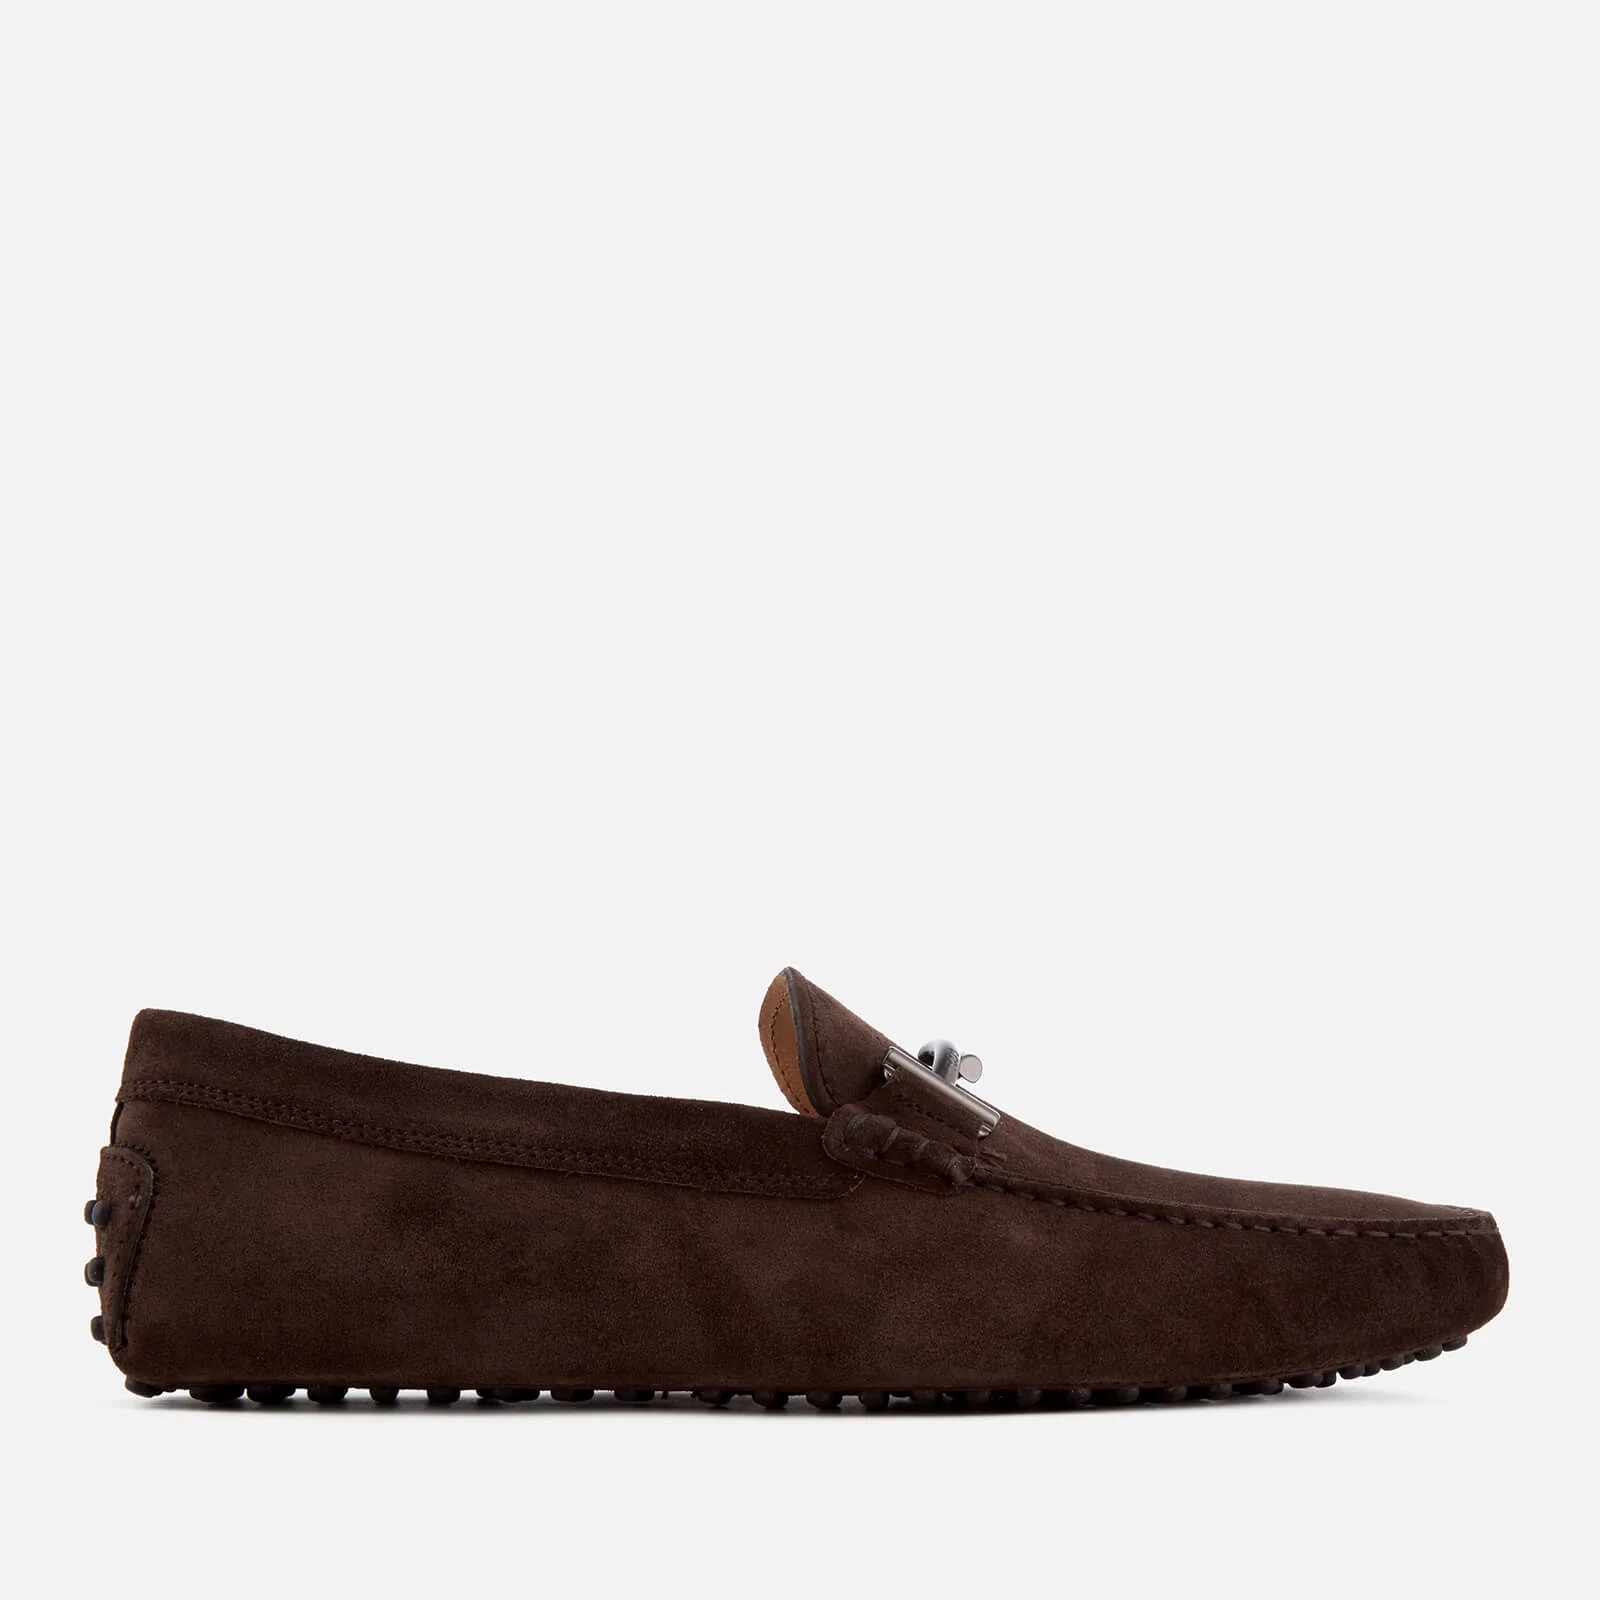 Tod's Men's Suede Gommino Double T Driving Shoes - Dark Brown Image 1